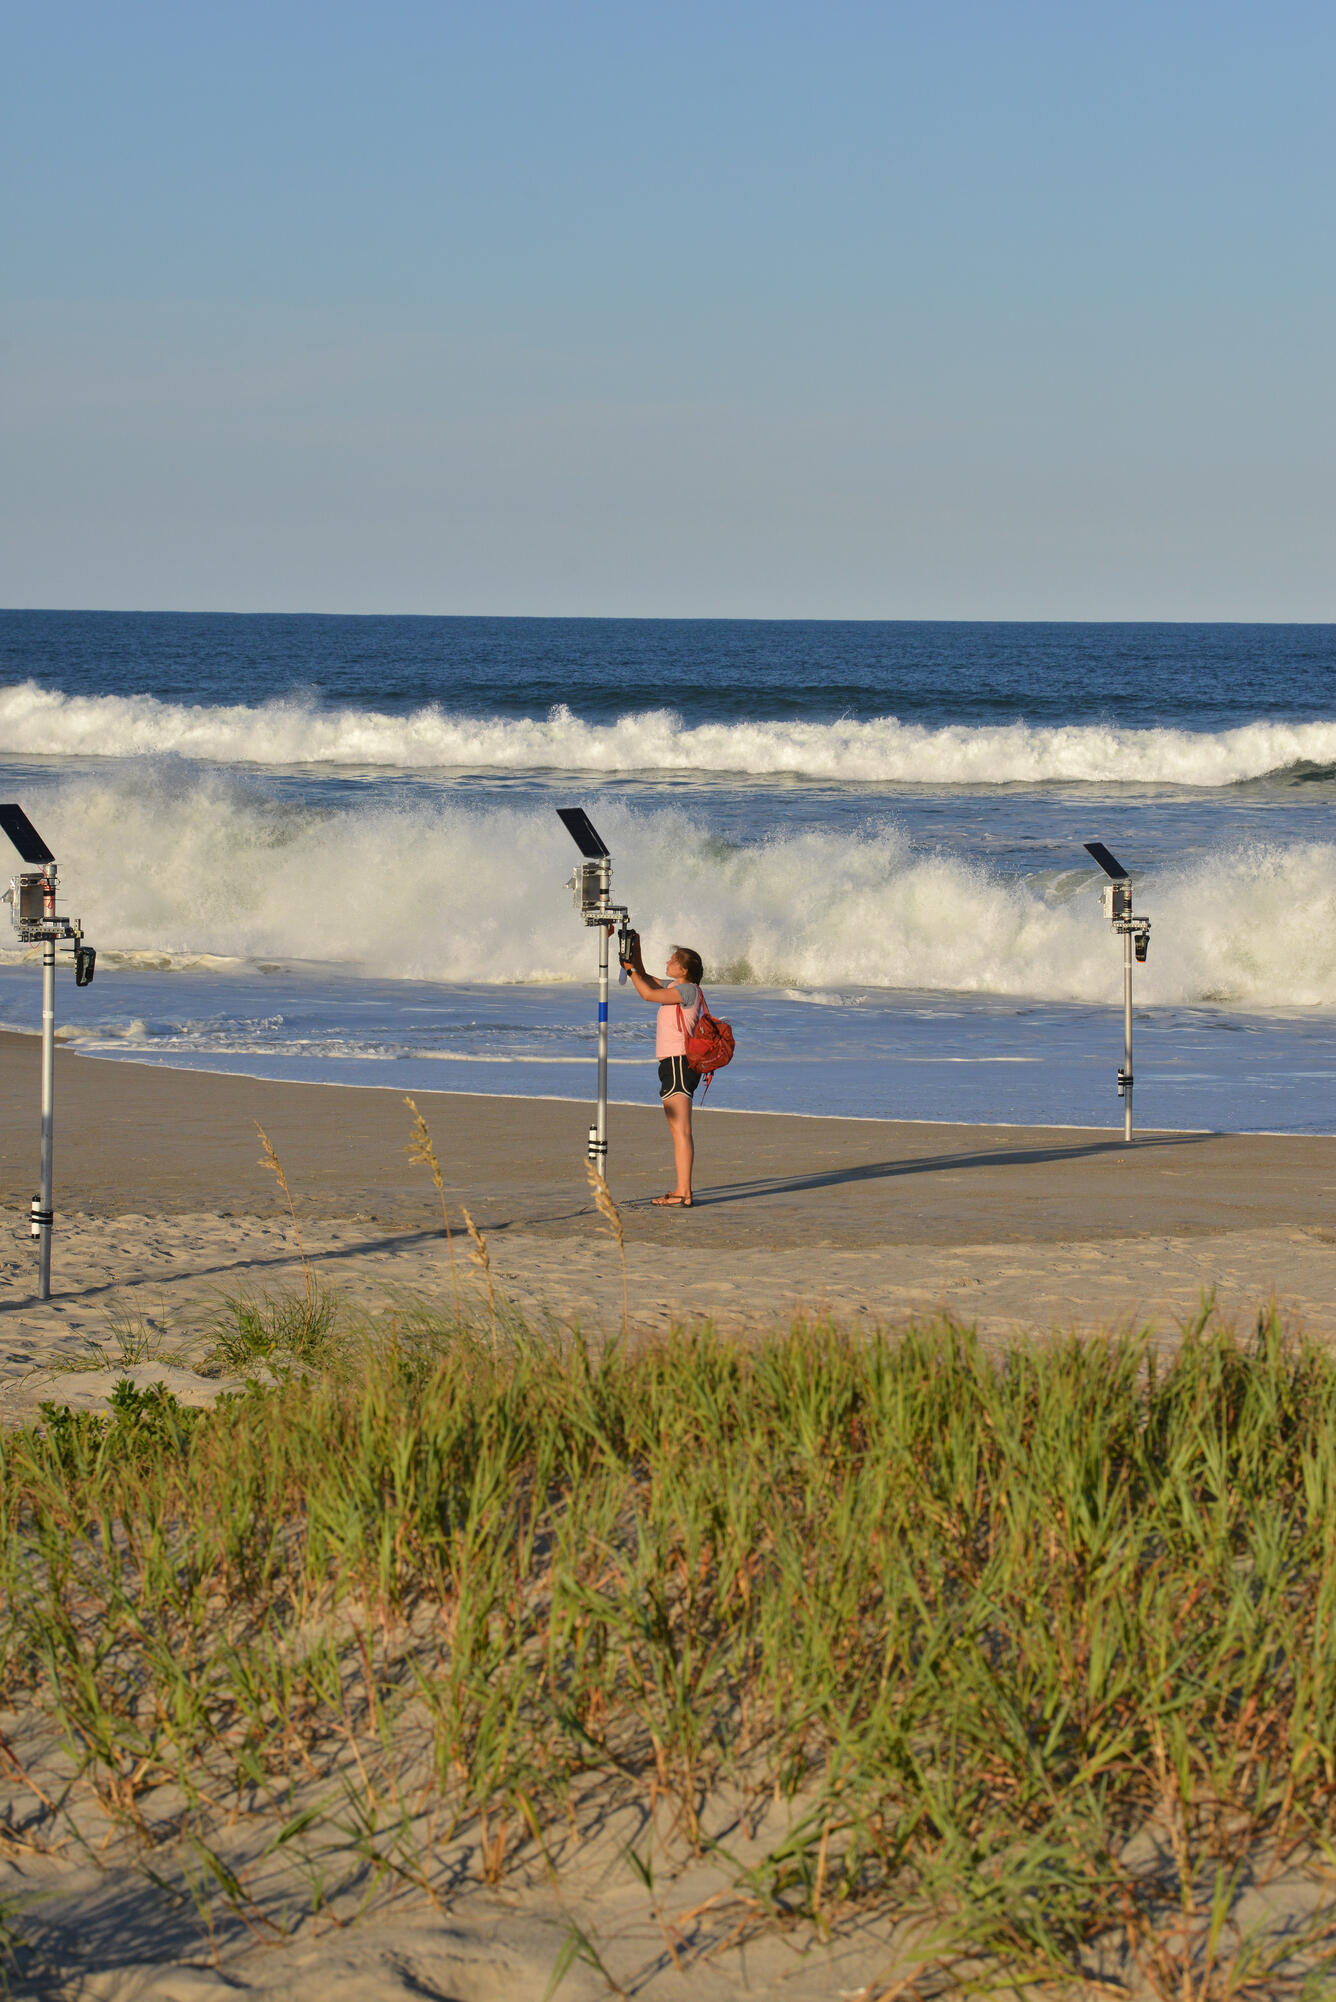 dune grass, sandy beach with three metal pole instruments leading to ocean, person working on one, ocean and sky